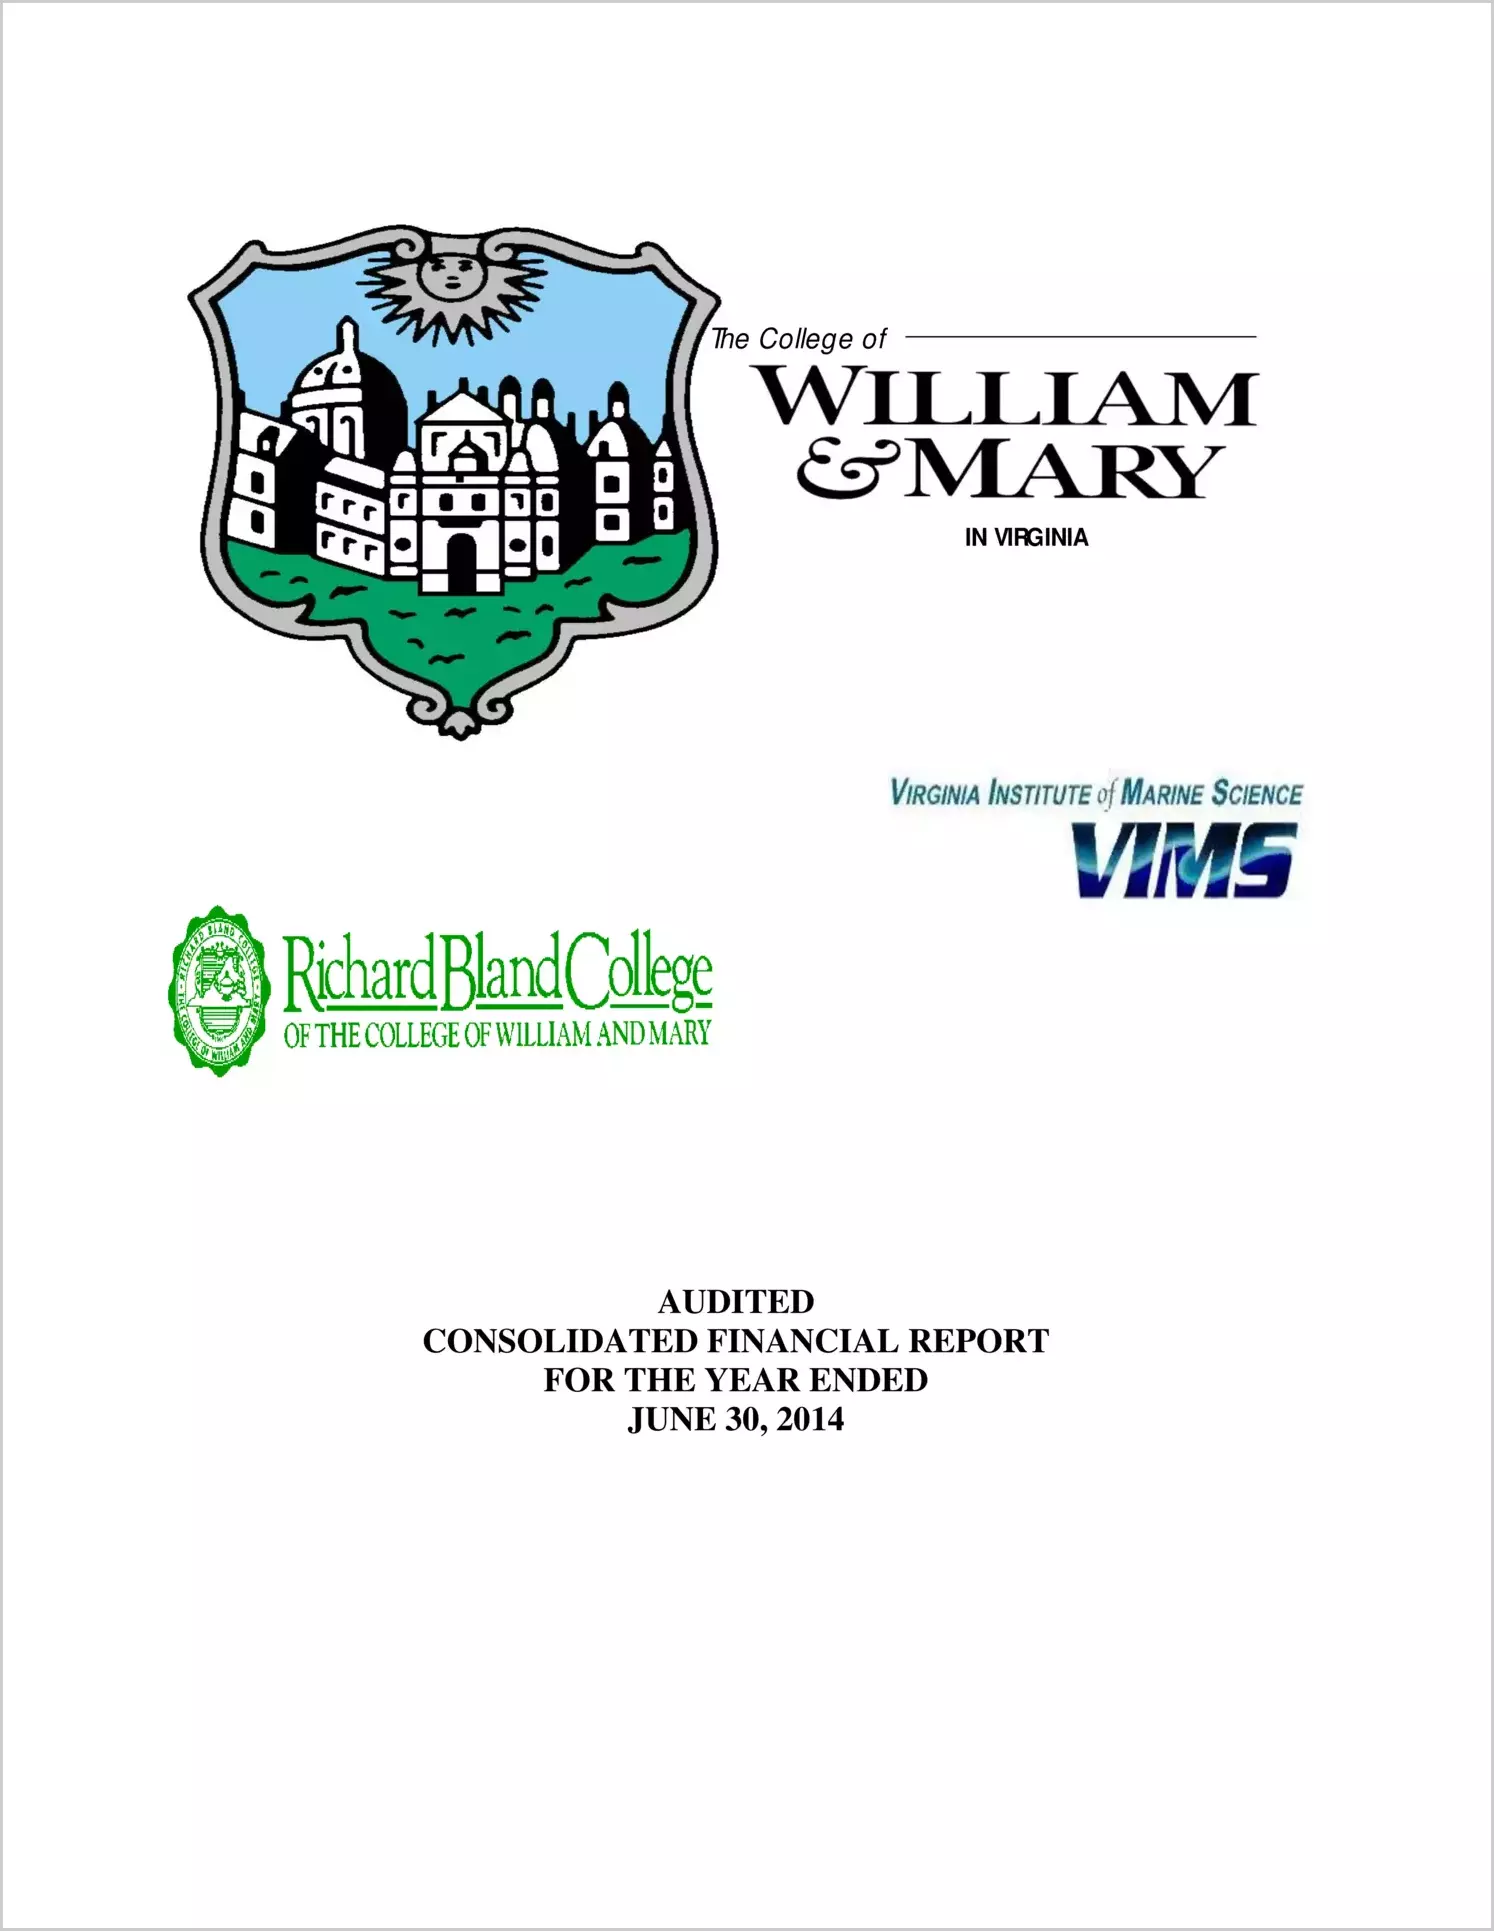 William & Mary, Virginia Institute of Marine Science, and Richard Bland College Financial Statements for the year ended June 30, 2014